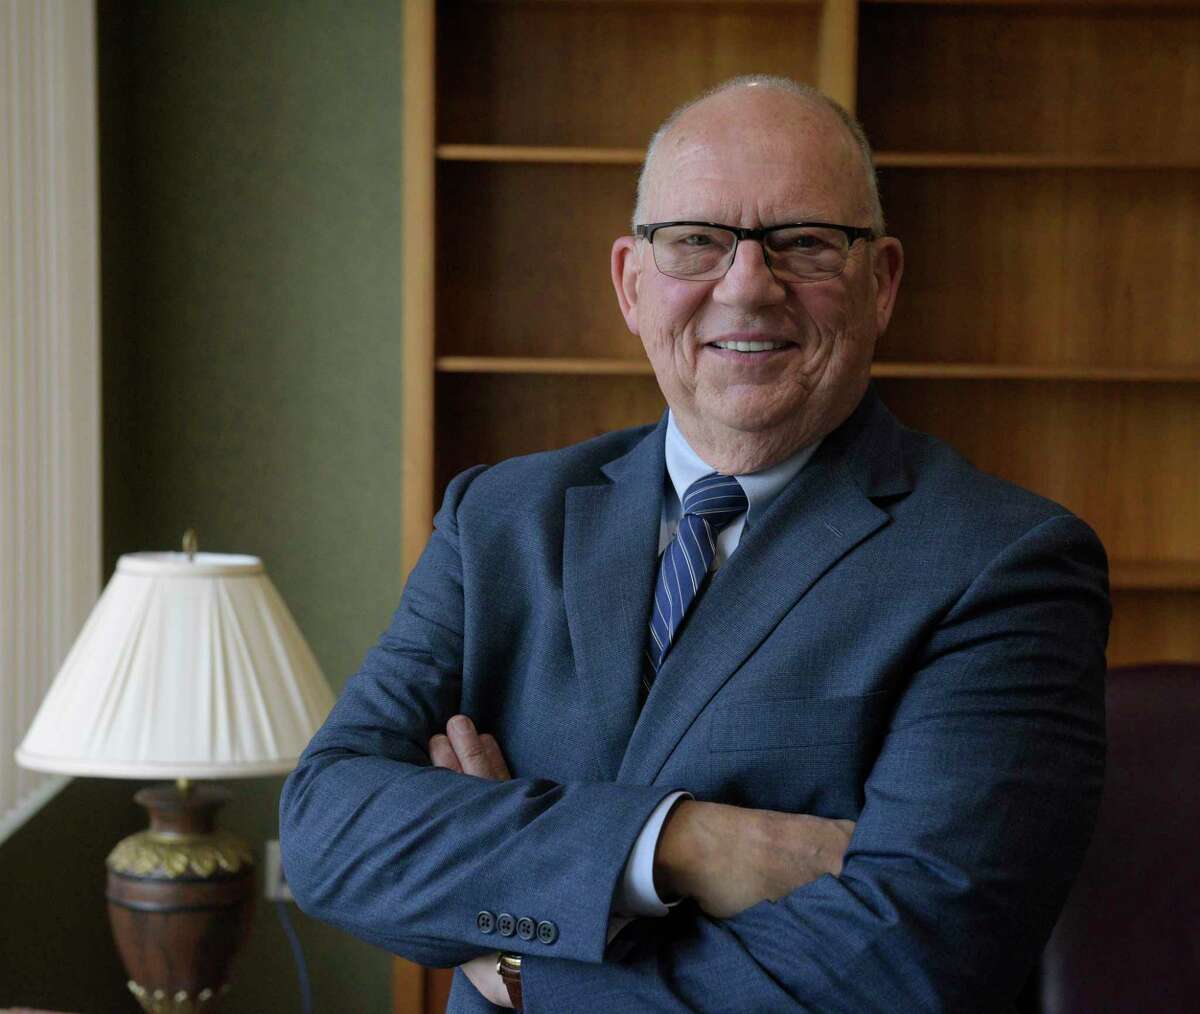 Paul Beran, new Western Connecticut State University President, in his office on Friday, July 29, 2022, Danbury, Conn.